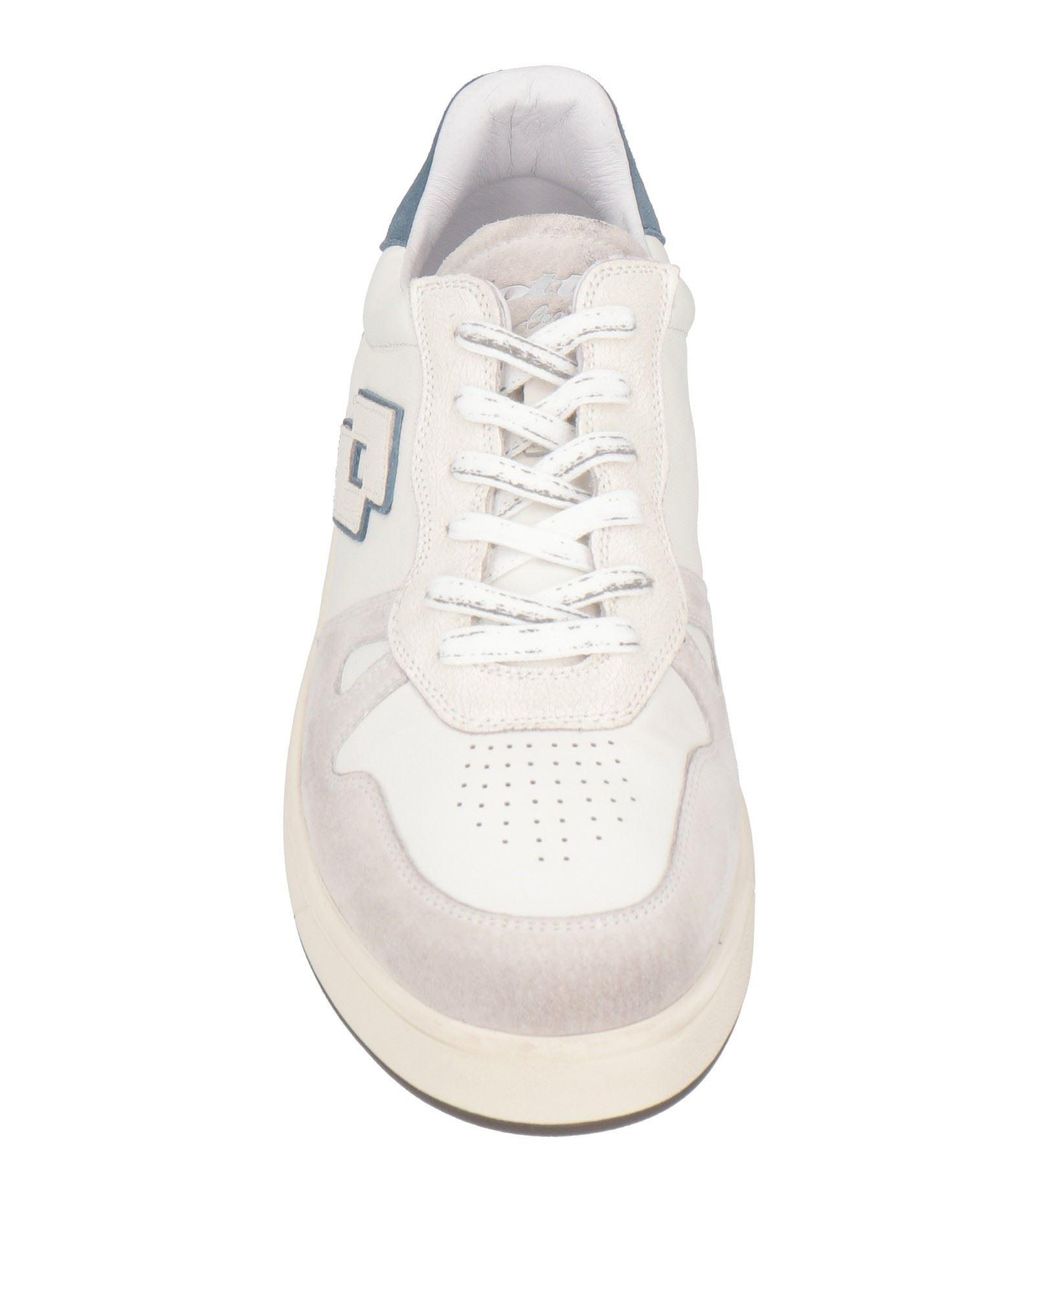 Sneakers BOY WHITE LOTTO : Sneakers . Besson Chaussures